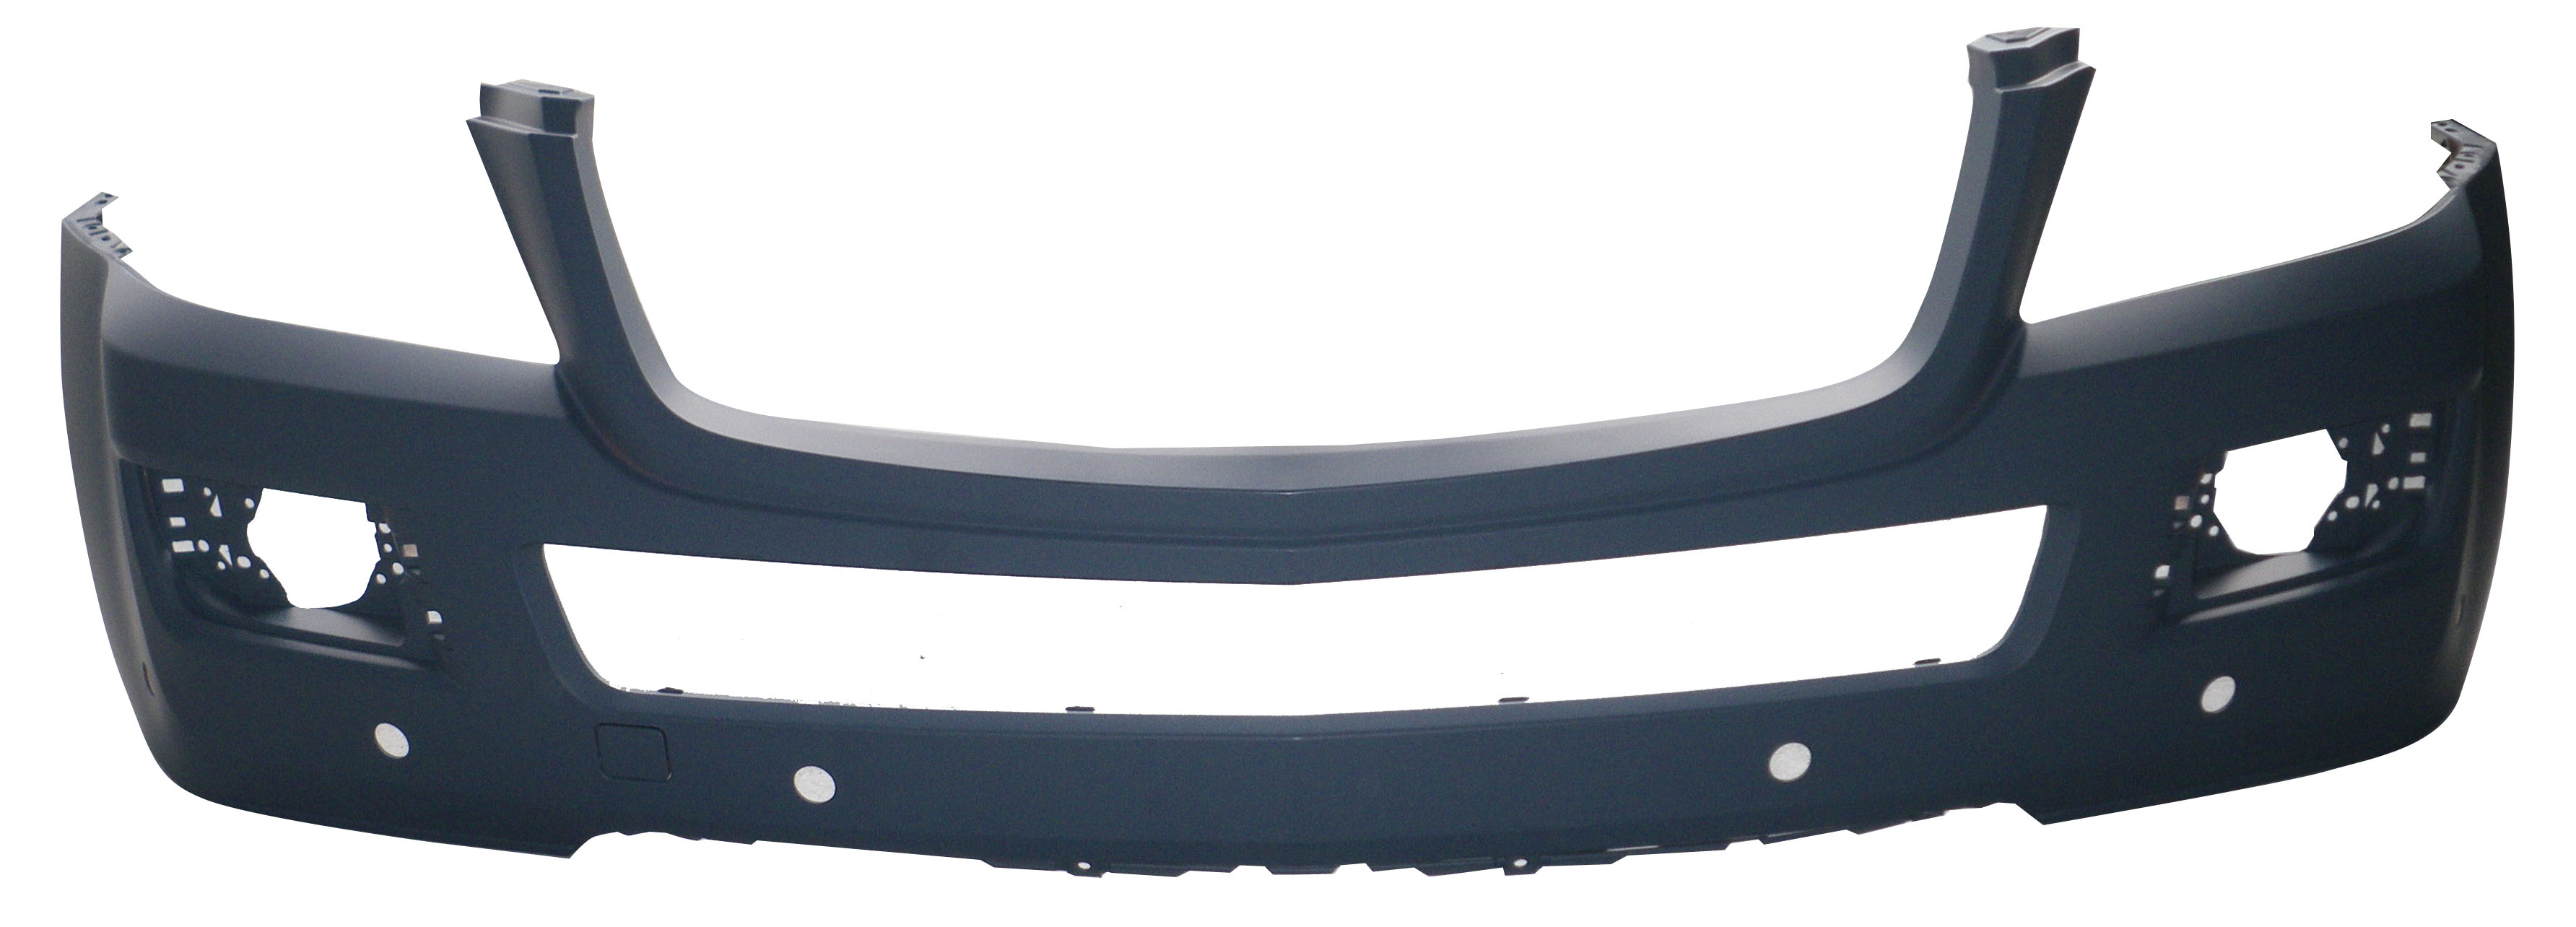 Aftermarket BUMPER COVERS for MERCEDES-BENZ - GL350, GL350,10-12,Front bumper cover